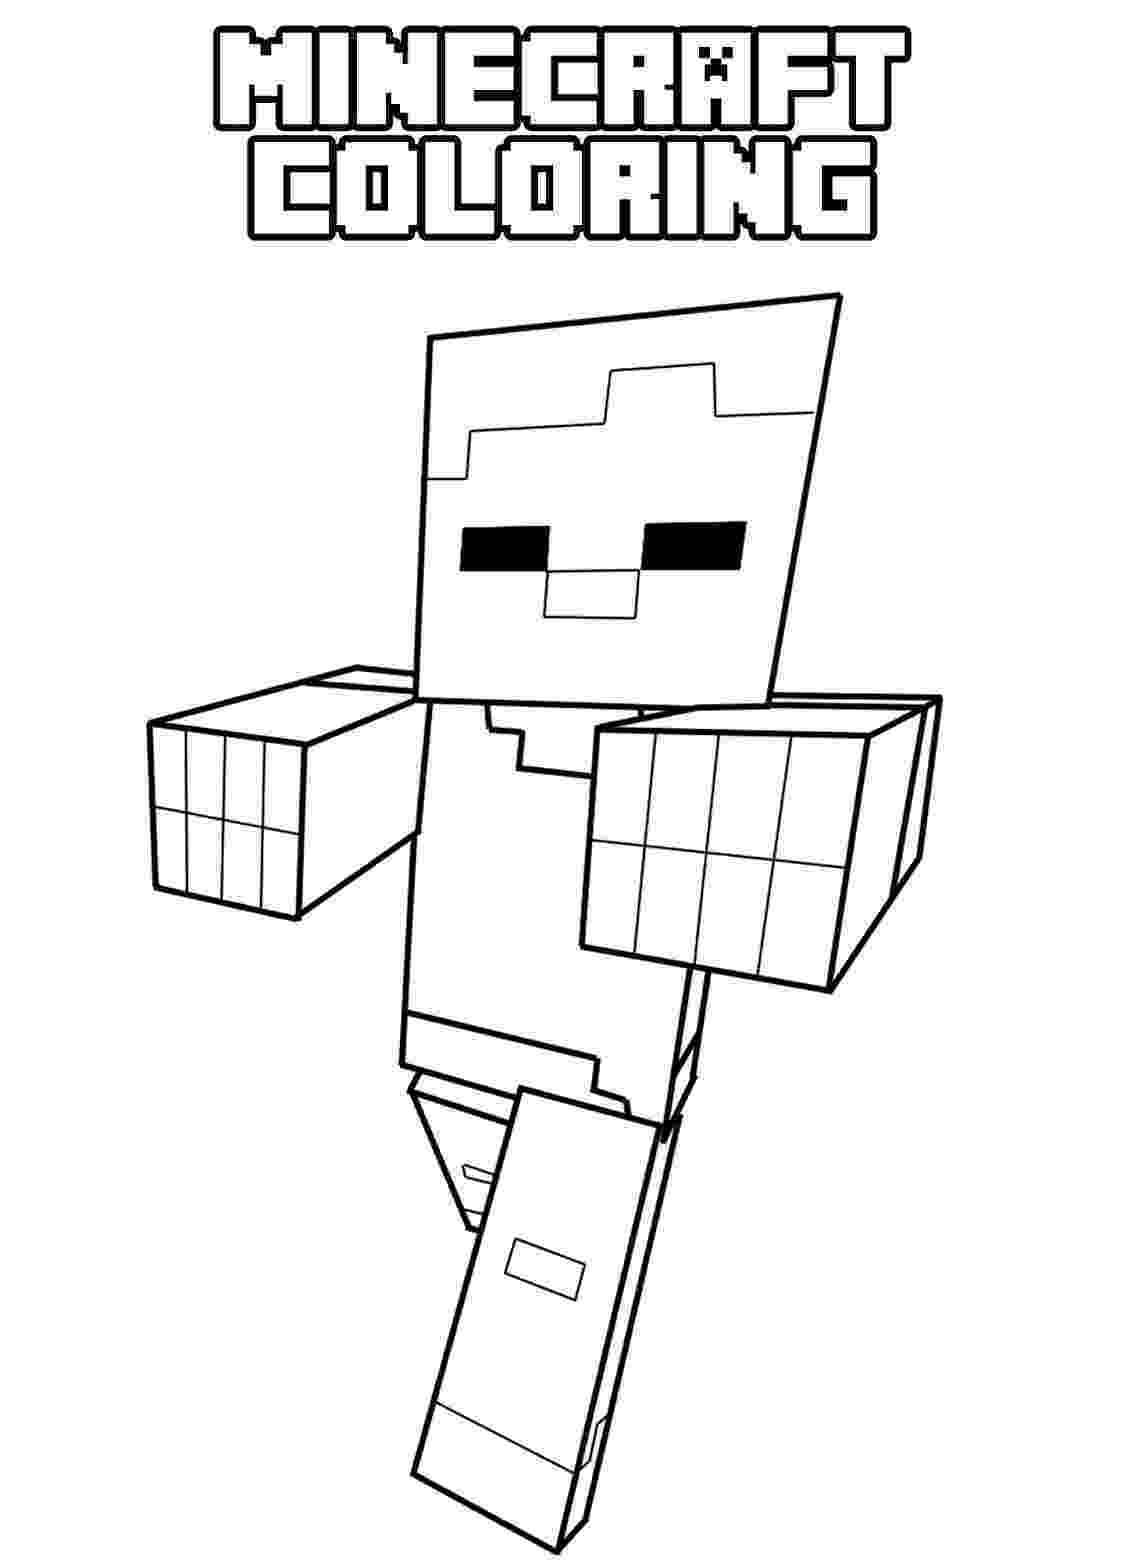 mincraft coloring pages minecraft coloring pages for kids coloring pages for kids pages coloring mincraft 